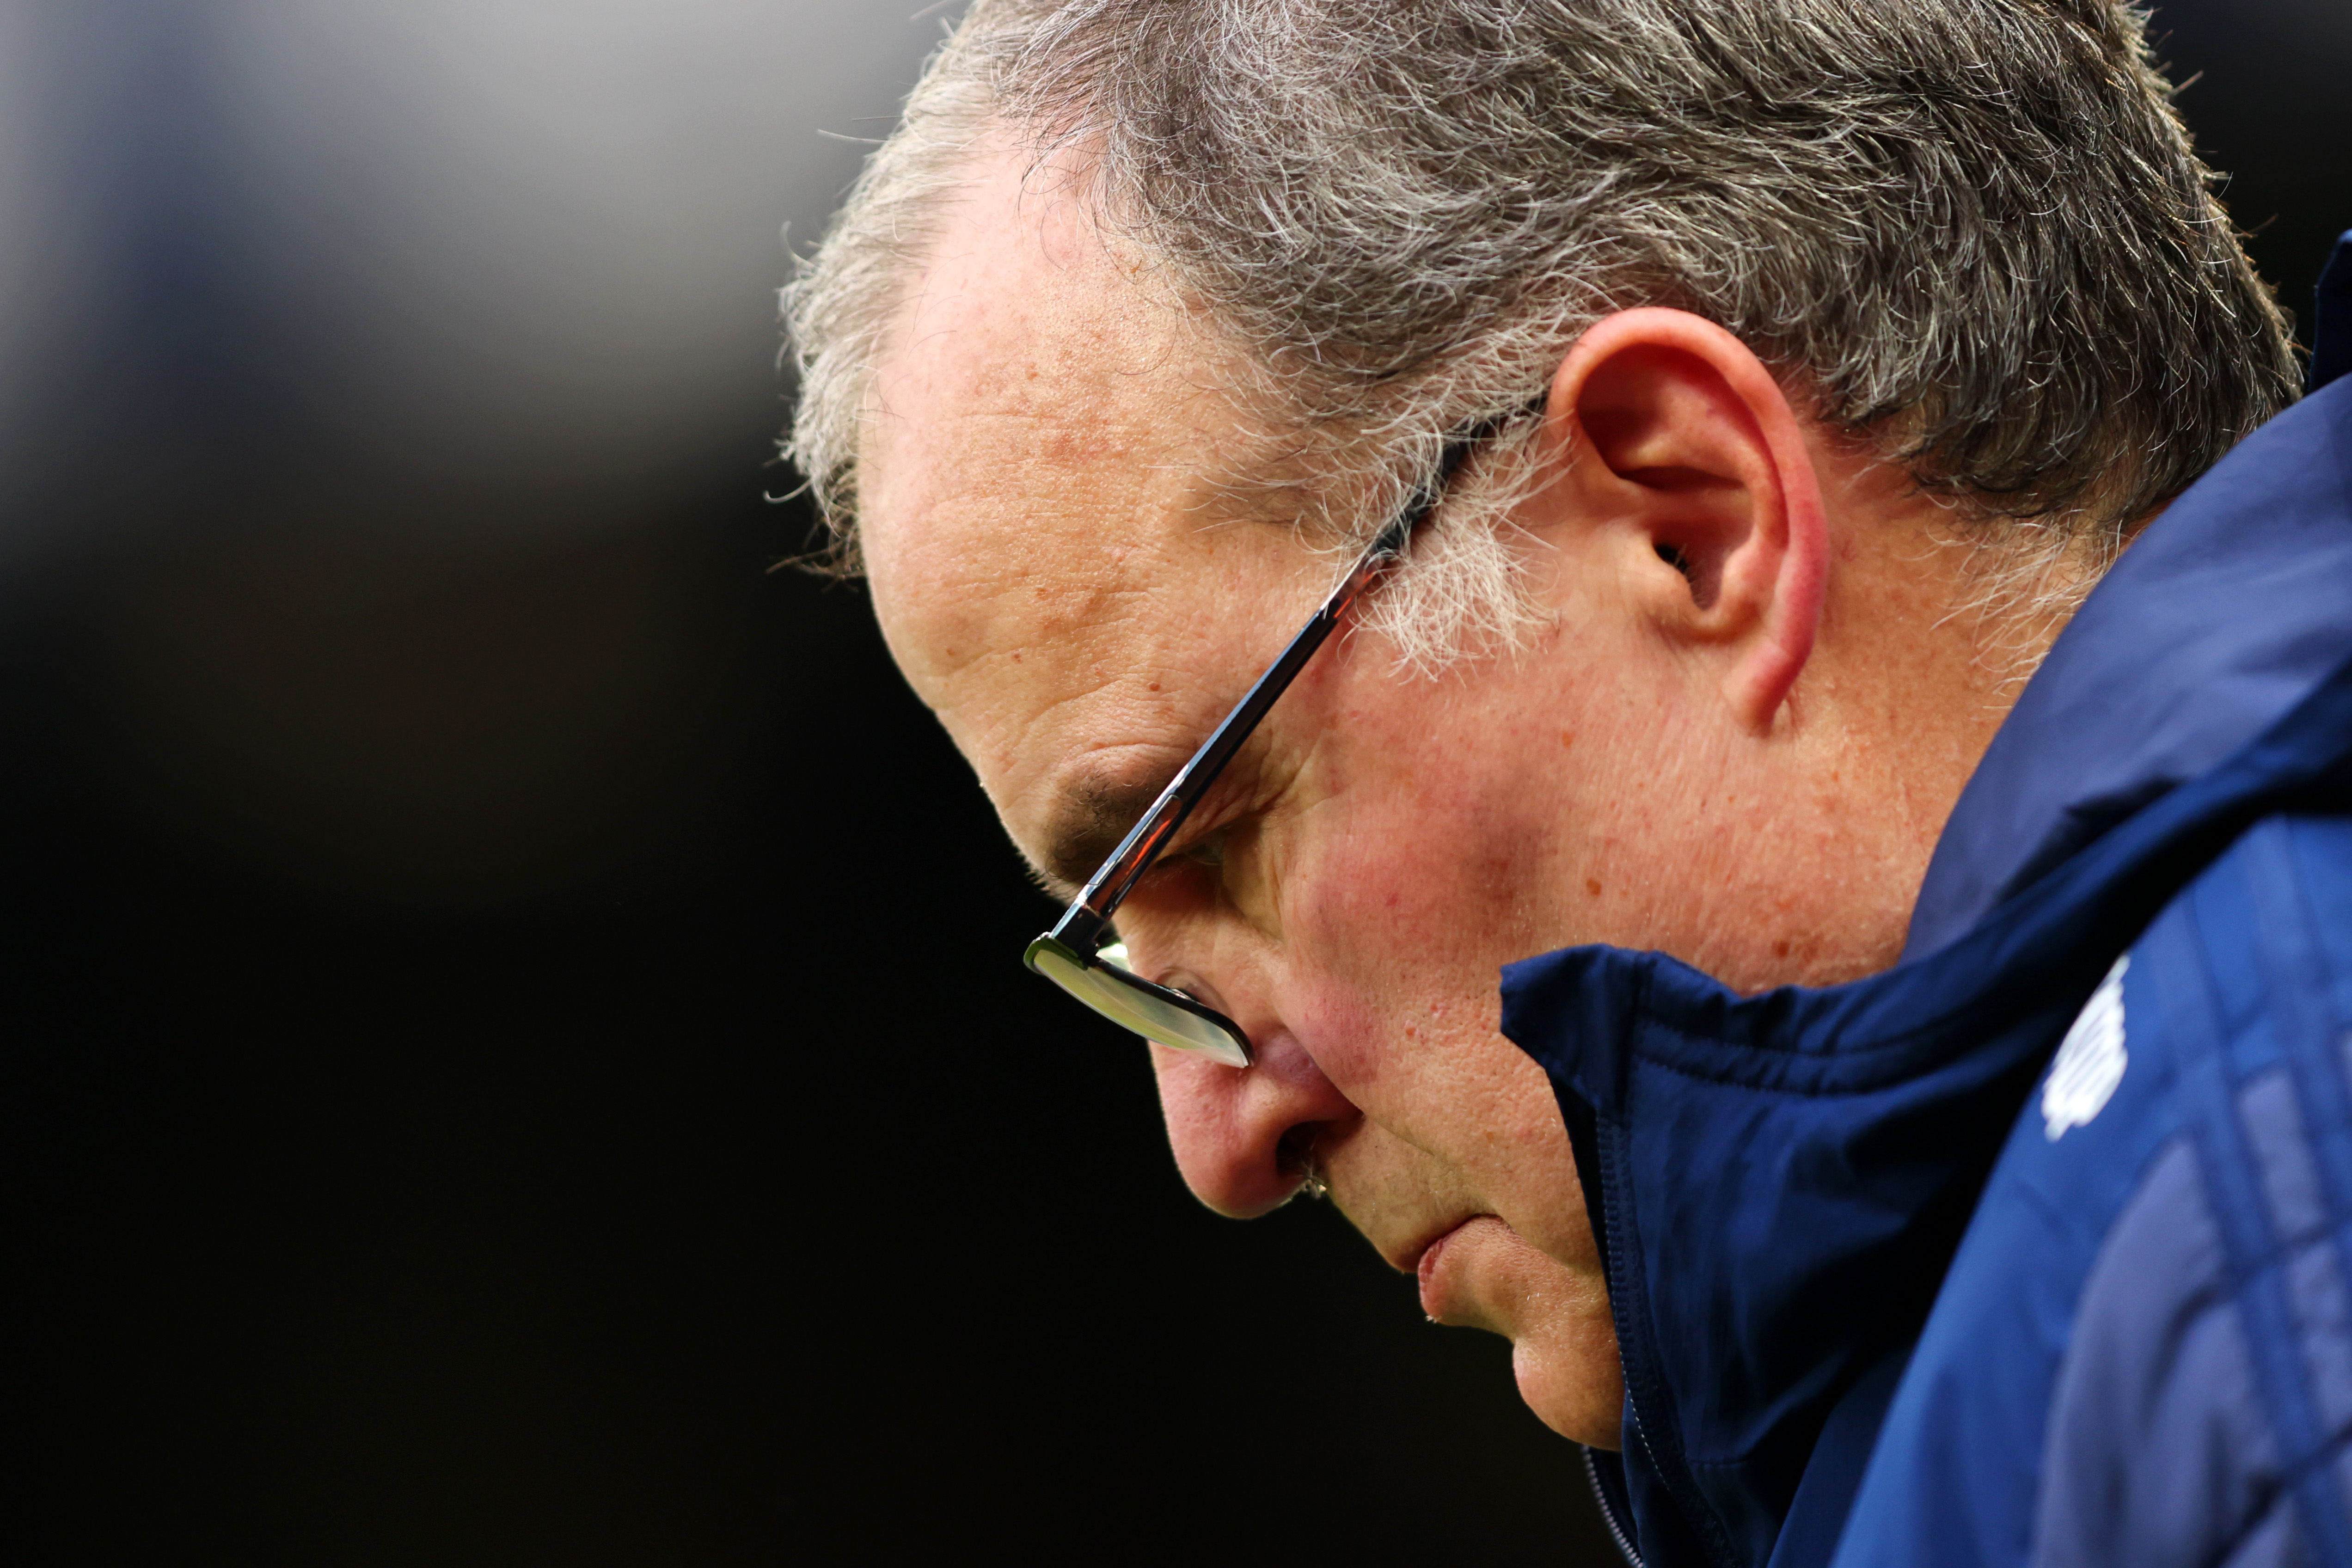 Leeds United manager Marcelo Bielsa sacked after defeat to Tottenham Hotspur